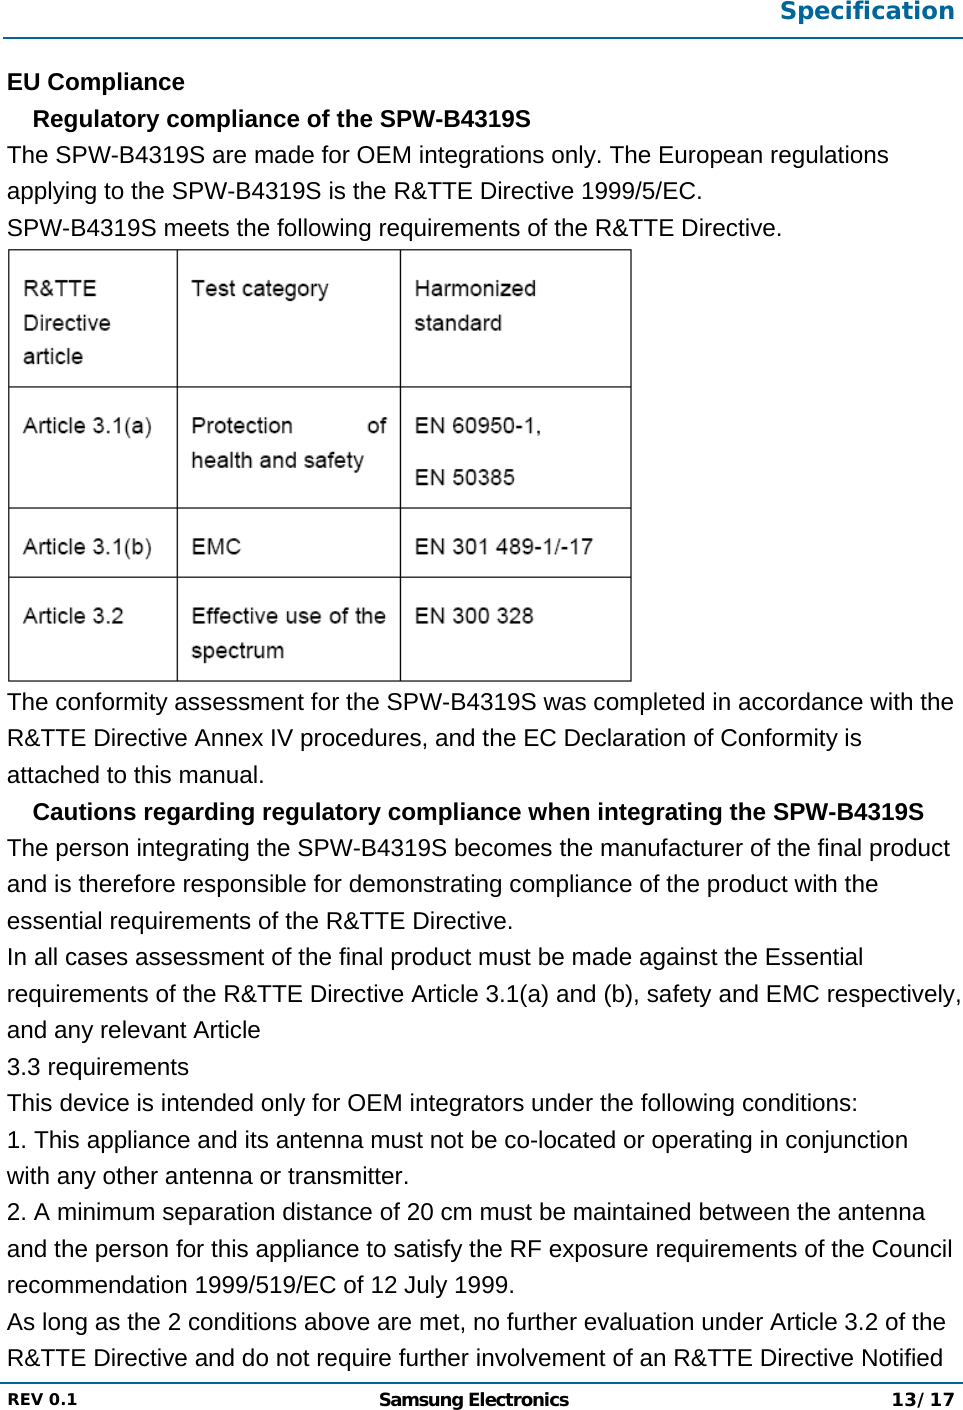  Specification  REV 0.1  Samsung Electronics 13/17  EU Compliance  Regulatory compliance of the SPW-B4319S  The SPW-B4319S are made for OEM integrations only. The European regulations applying to the SPW-B4319S is the R&amp;TTE Directive 1999/5/EC. SPW-B4319S meets the following requirements of the R&amp;TTE Directive.  The conformity assessment for the SPW-B4319S was completed in accordance with the R&amp;TTE Directive Annex IV procedures, and the EC Declaration of Conformity is attached to this manual.  Cautions regarding regulatory compliance when integrating the SPW-B4319S  The person integrating the SPW-B4319S becomes the manufacturer of the final product and is therefore responsible for demonstrating compliance of the product with the essential requirements of the R&amp;TTE Directive. In all cases assessment of the final product must be made against the Essential requirements of the R&amp;TTE Directive Article 3.1(a) and (b), safety and EMC respectively, and any relevant Article 3.3 requirements This device is intended only for OEM integrators under the following conditions: 1. This appliance and its antenna must not be co-located or operating in conjunction with any other antenna or transmitter. 2. A minimum separation distance of 20 cm must be maintained between the antenna and the person for this appliance to satisfy the RF exposure requirements of the Council recommendation 1999/519/EC of 12 July 1999. As long as the 2 conditions above are met, no further evaluation under Article 3.2 of the R&amp;TTE Directive and do not require further involvement of an R&amp;TTE Directive Notified 